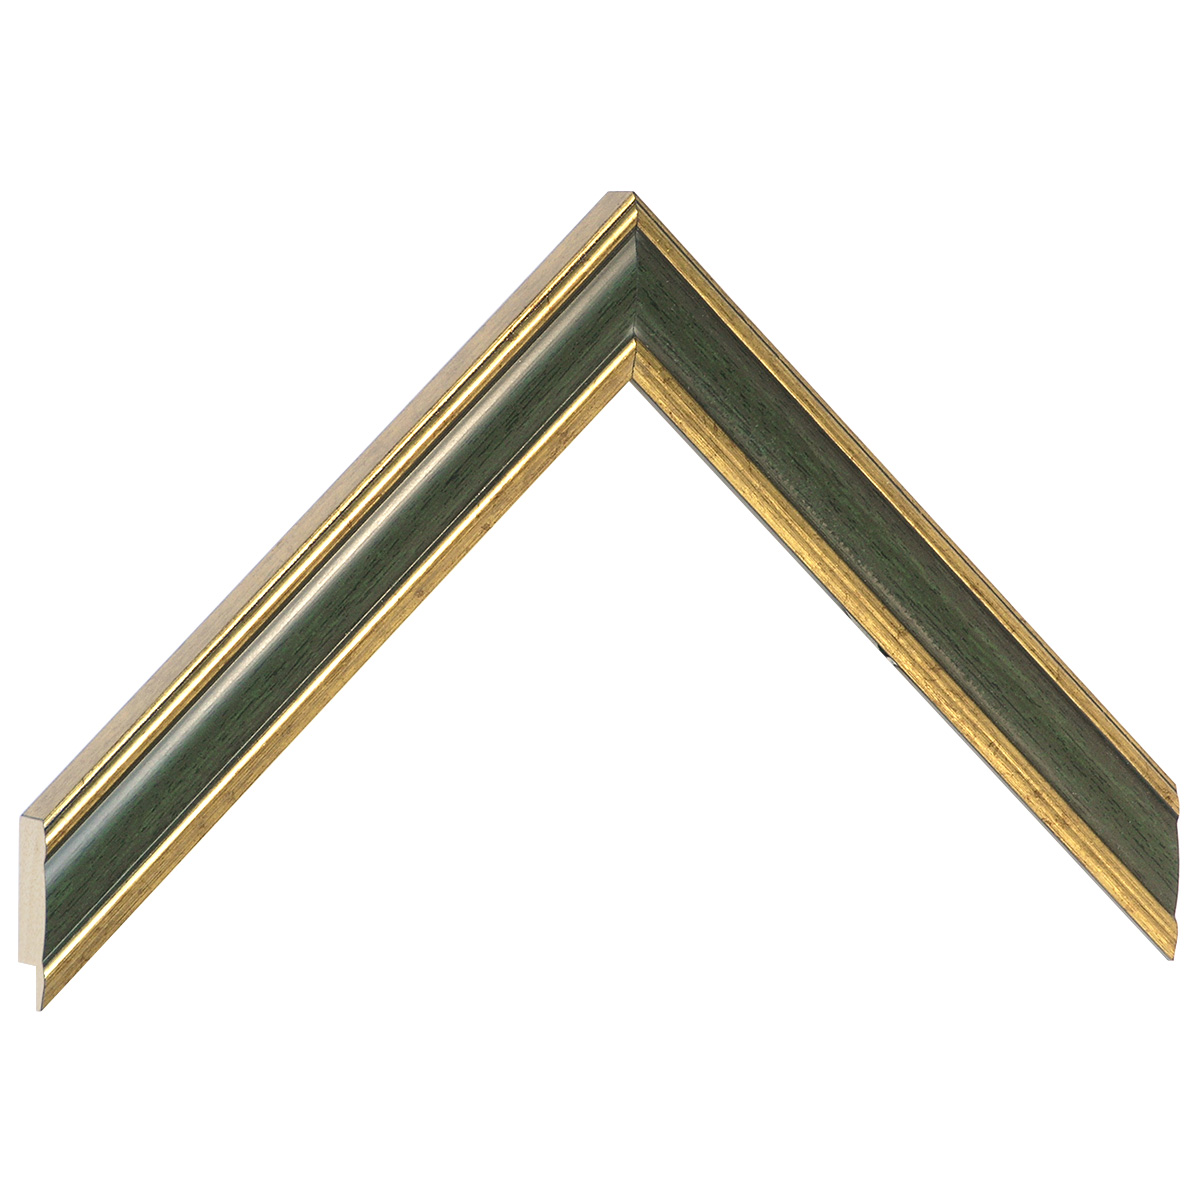 Moulding ayous jointed width 24mm - Gold with olive green band - Sample